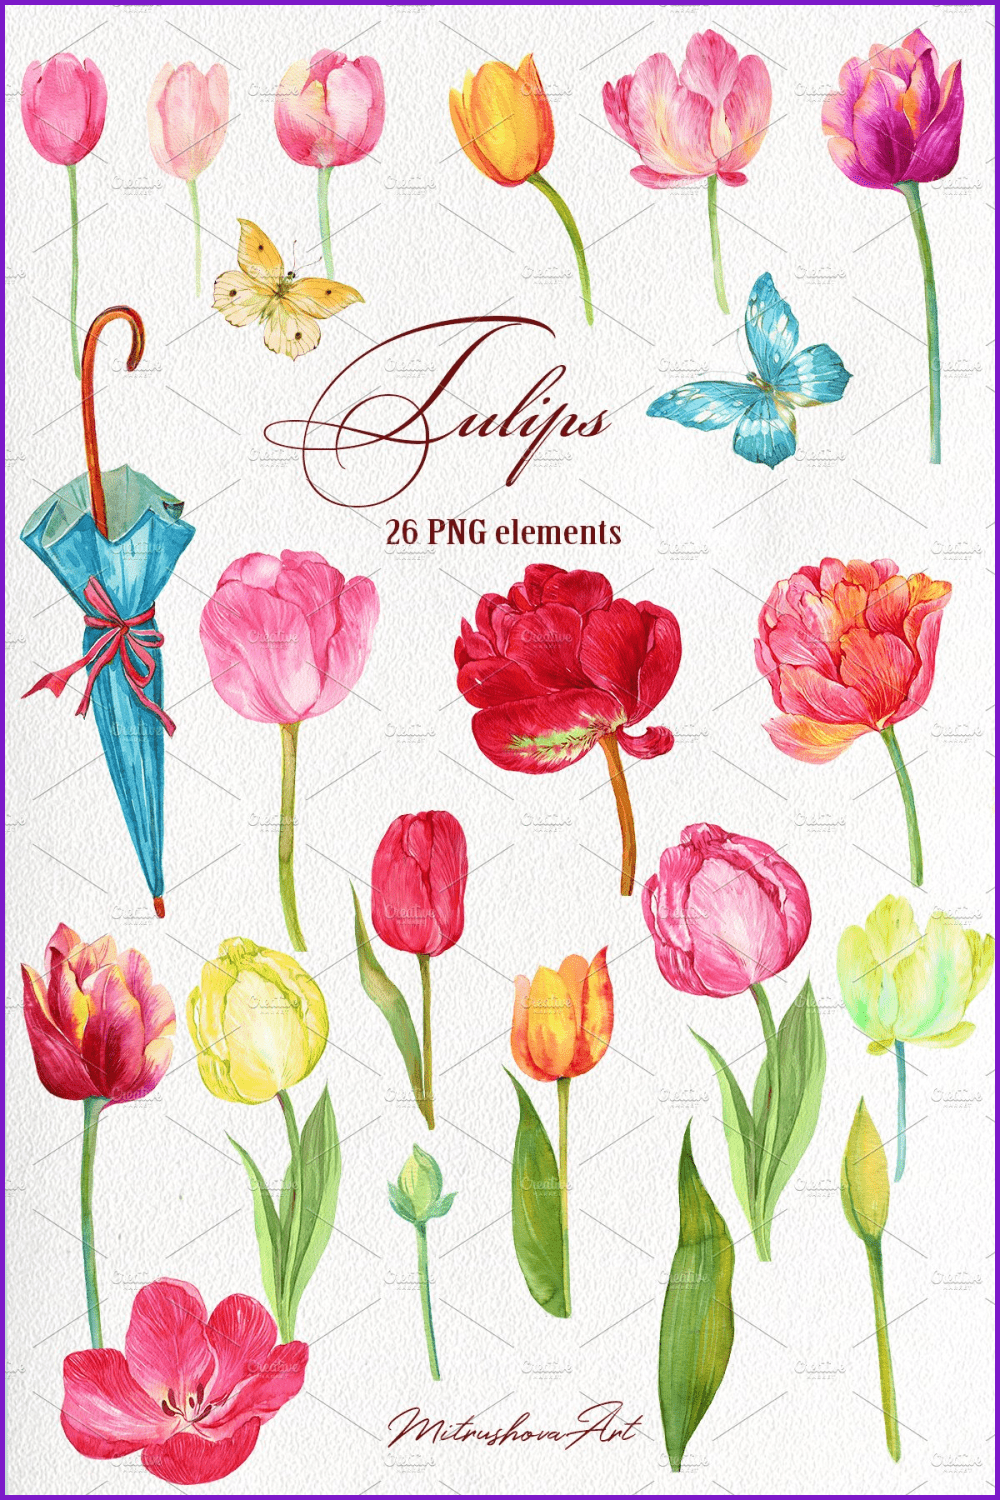 Collage with many different form tulips.